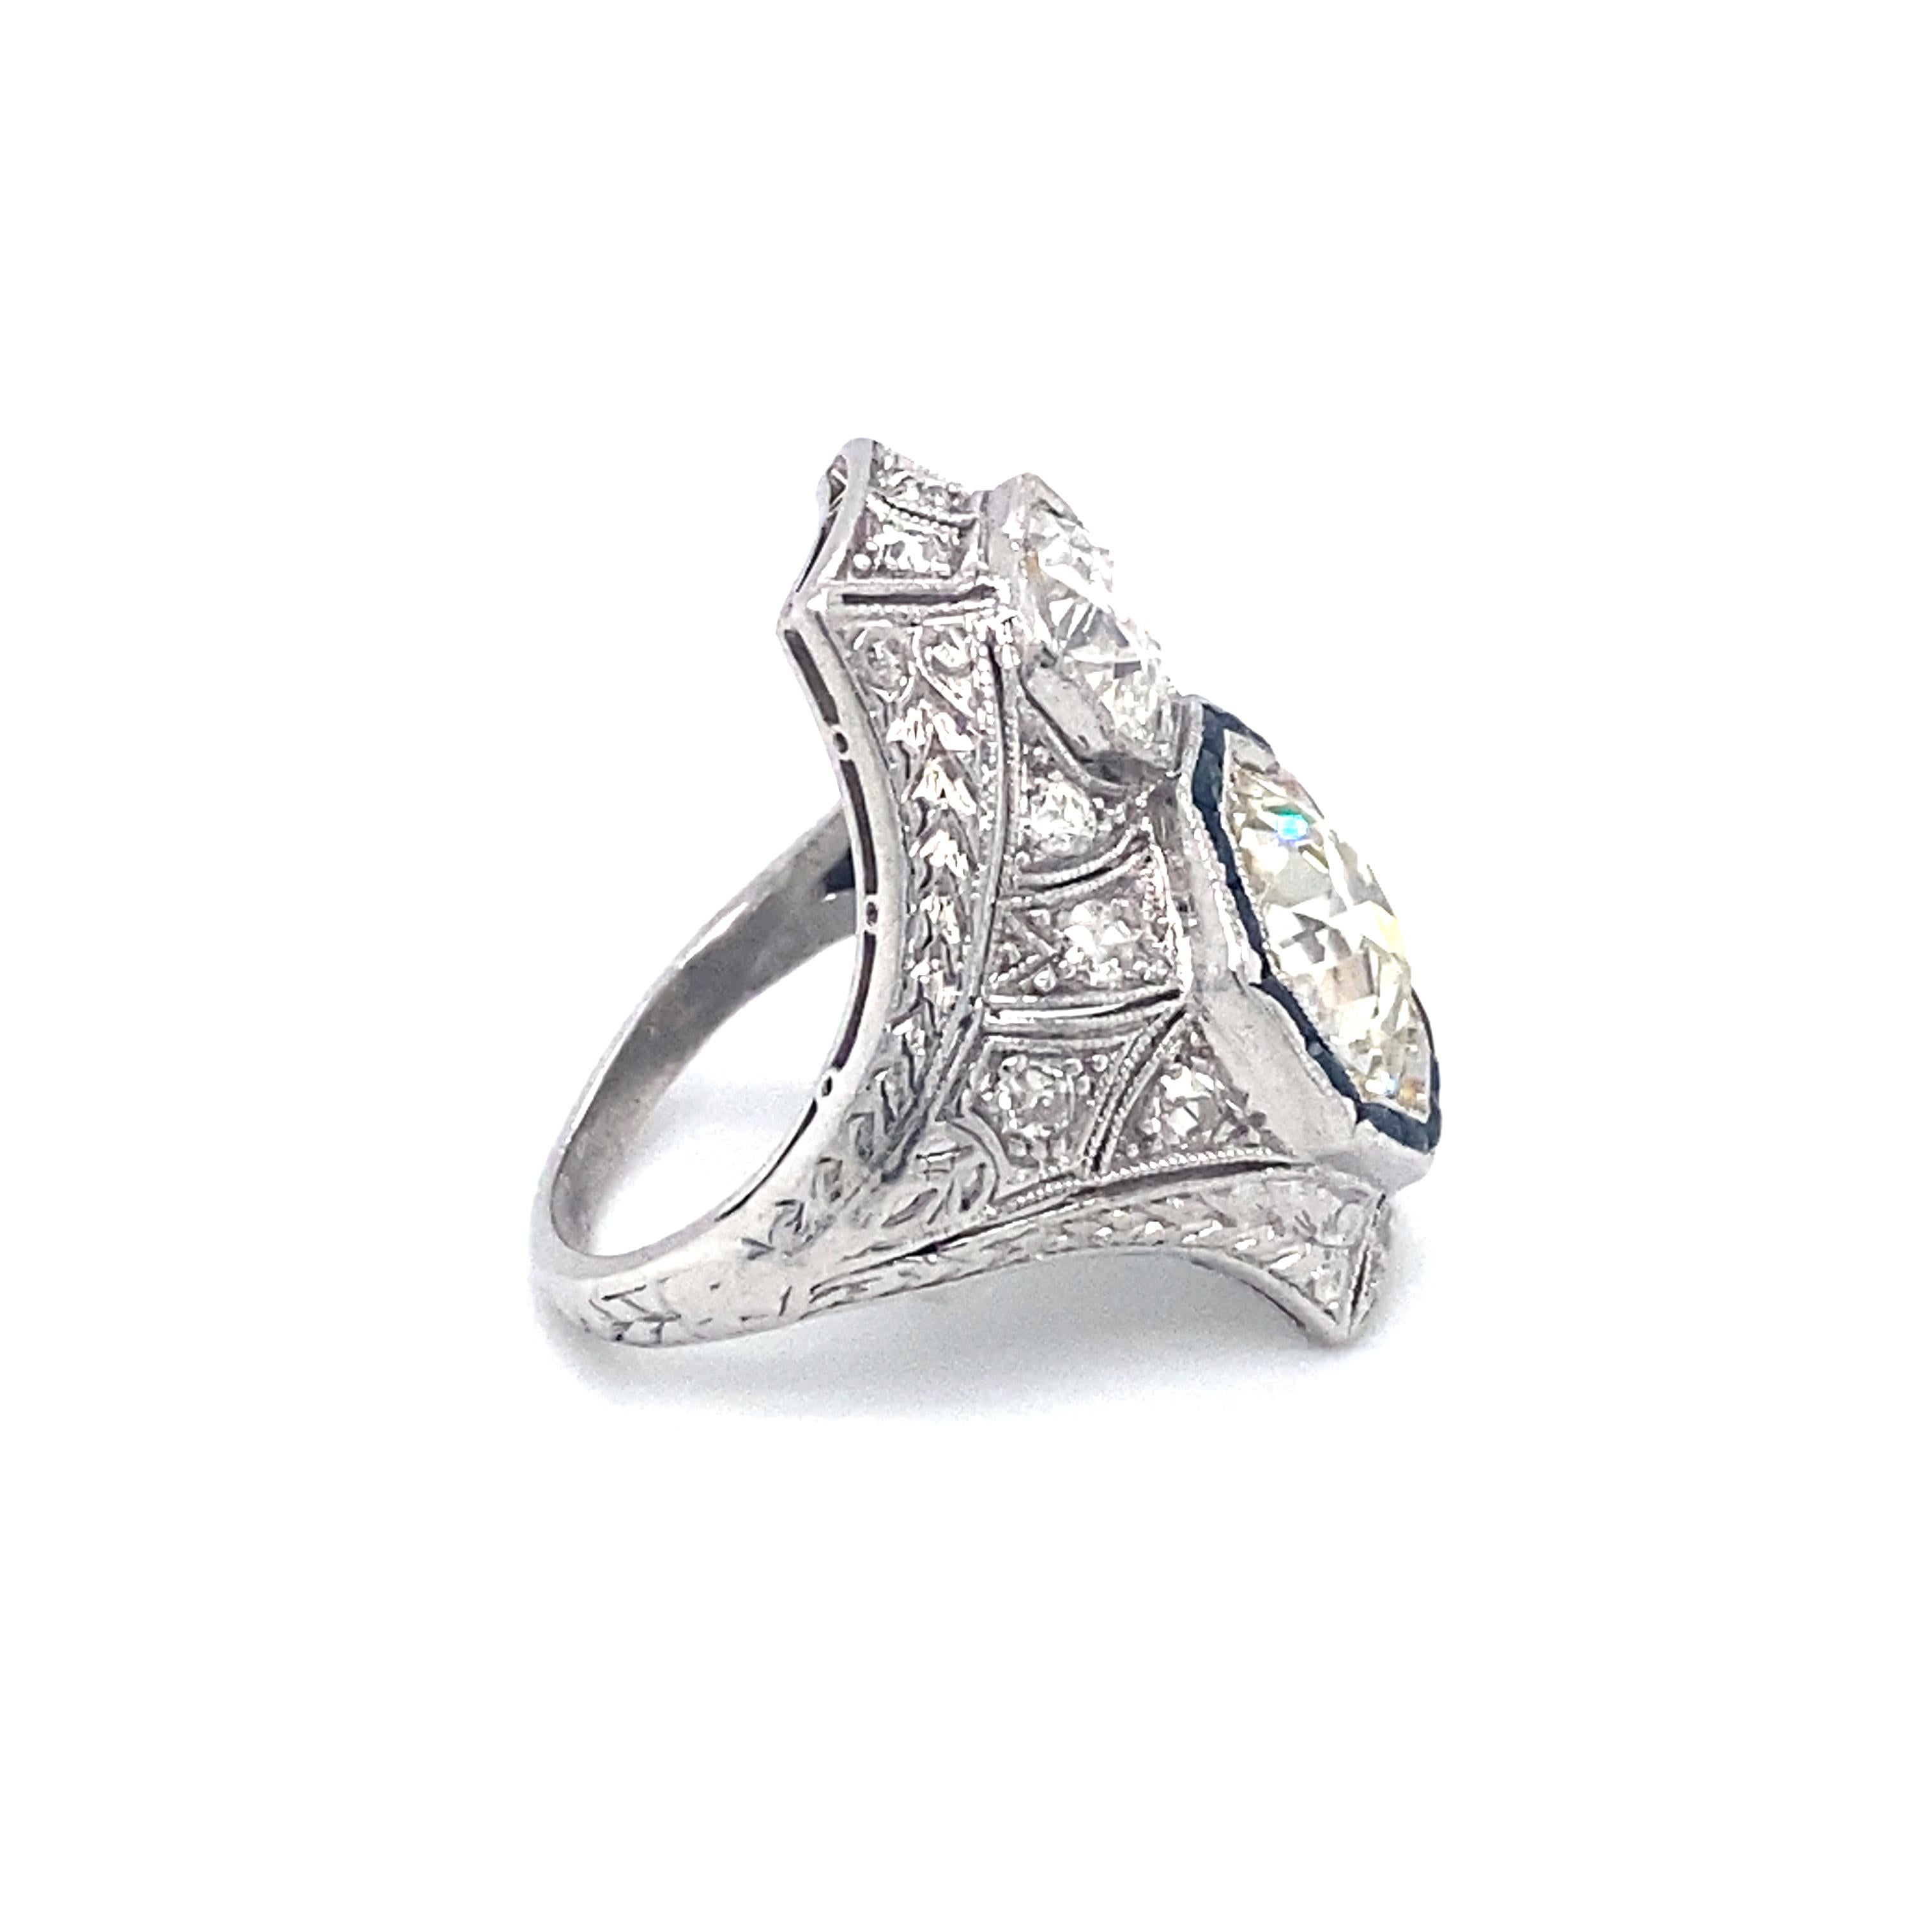 1920s Art Deco 3.70 Carat Total Diamond and Sapphire Cocktail Ring in Platinum In Excellent Condition For Sale In Atlanta, GA